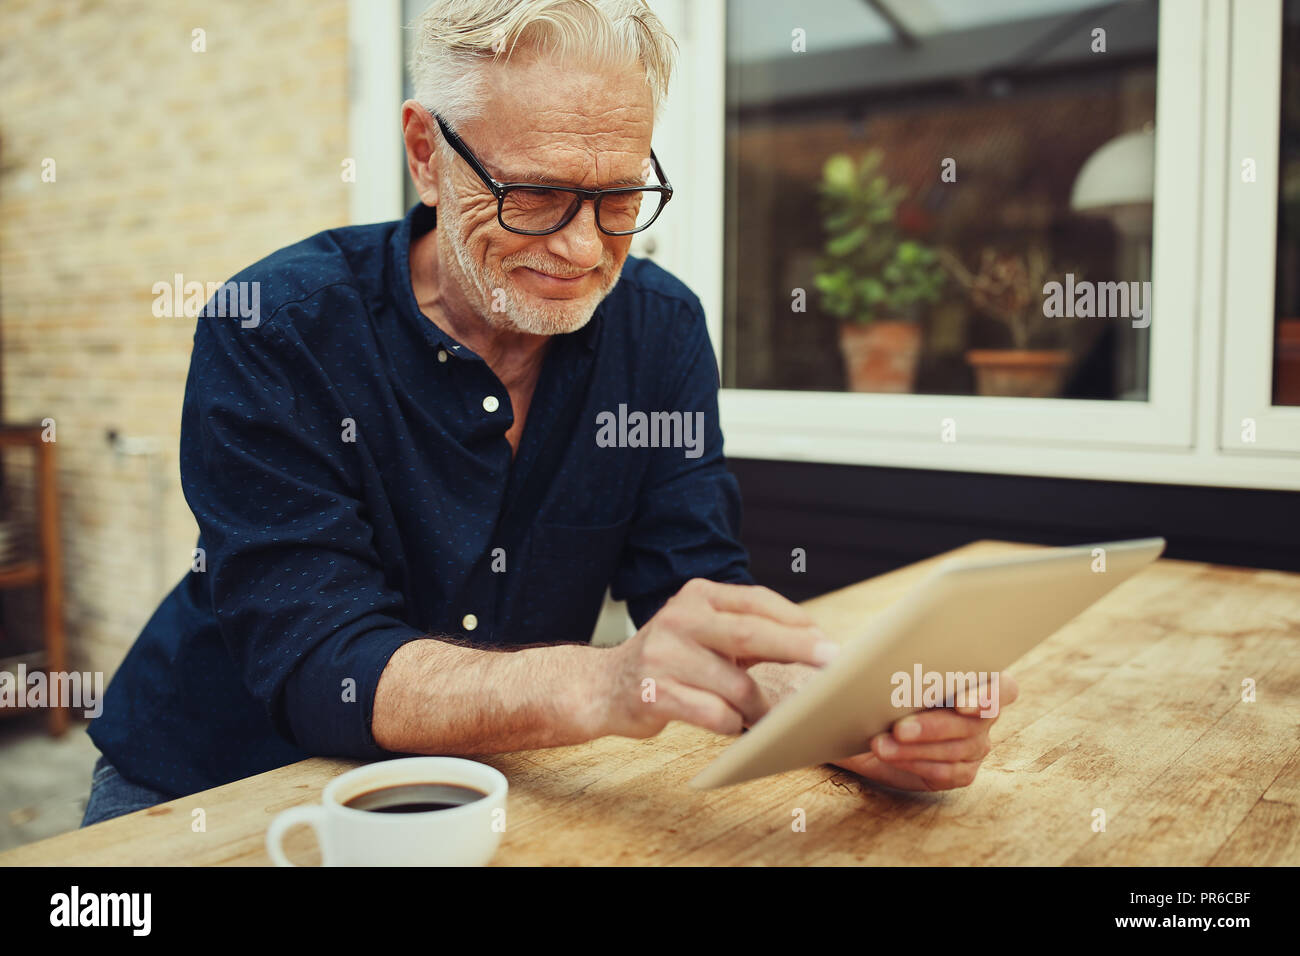 Smiling senior man working nline with a tablet and drinking a cup of coffee while sitting at a table outside on his patio Stock Photo